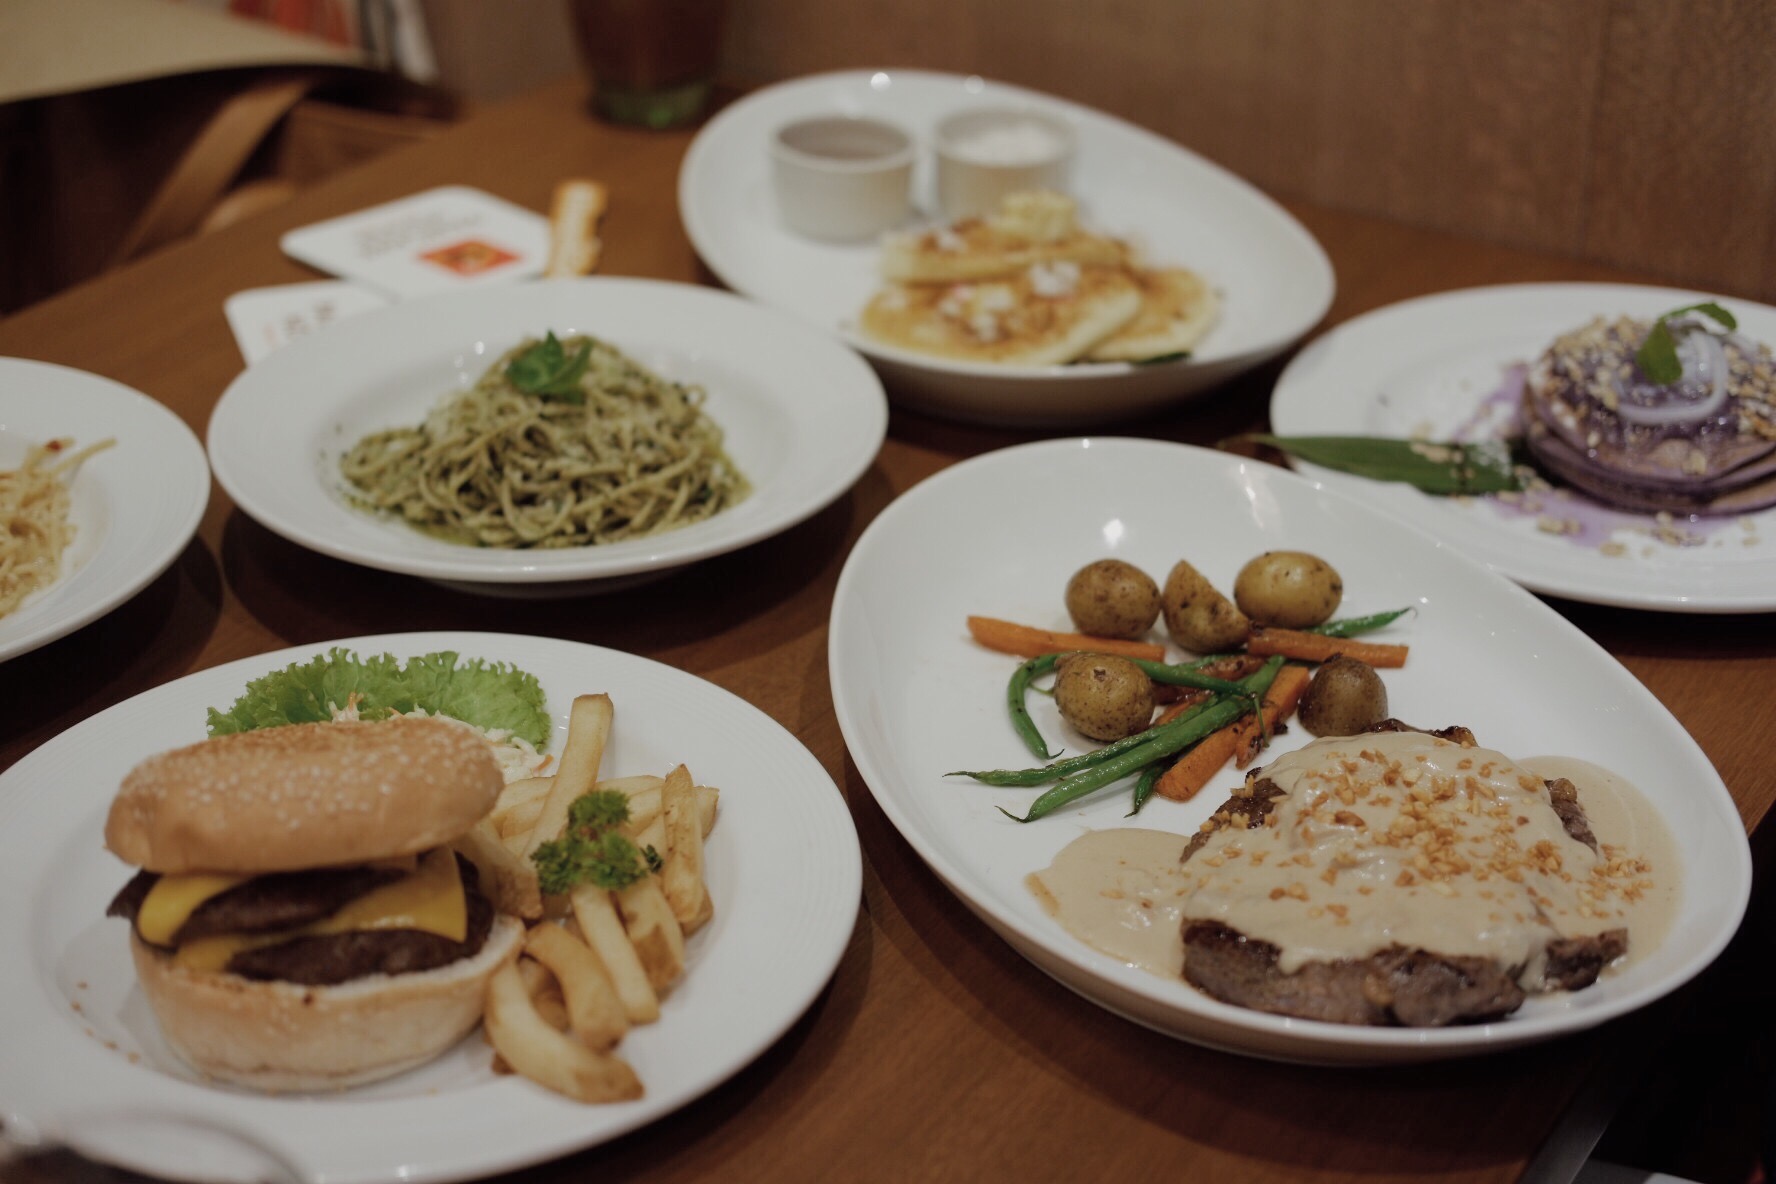 Where to Grab Your Next Hearty Meal? Try Pancake House